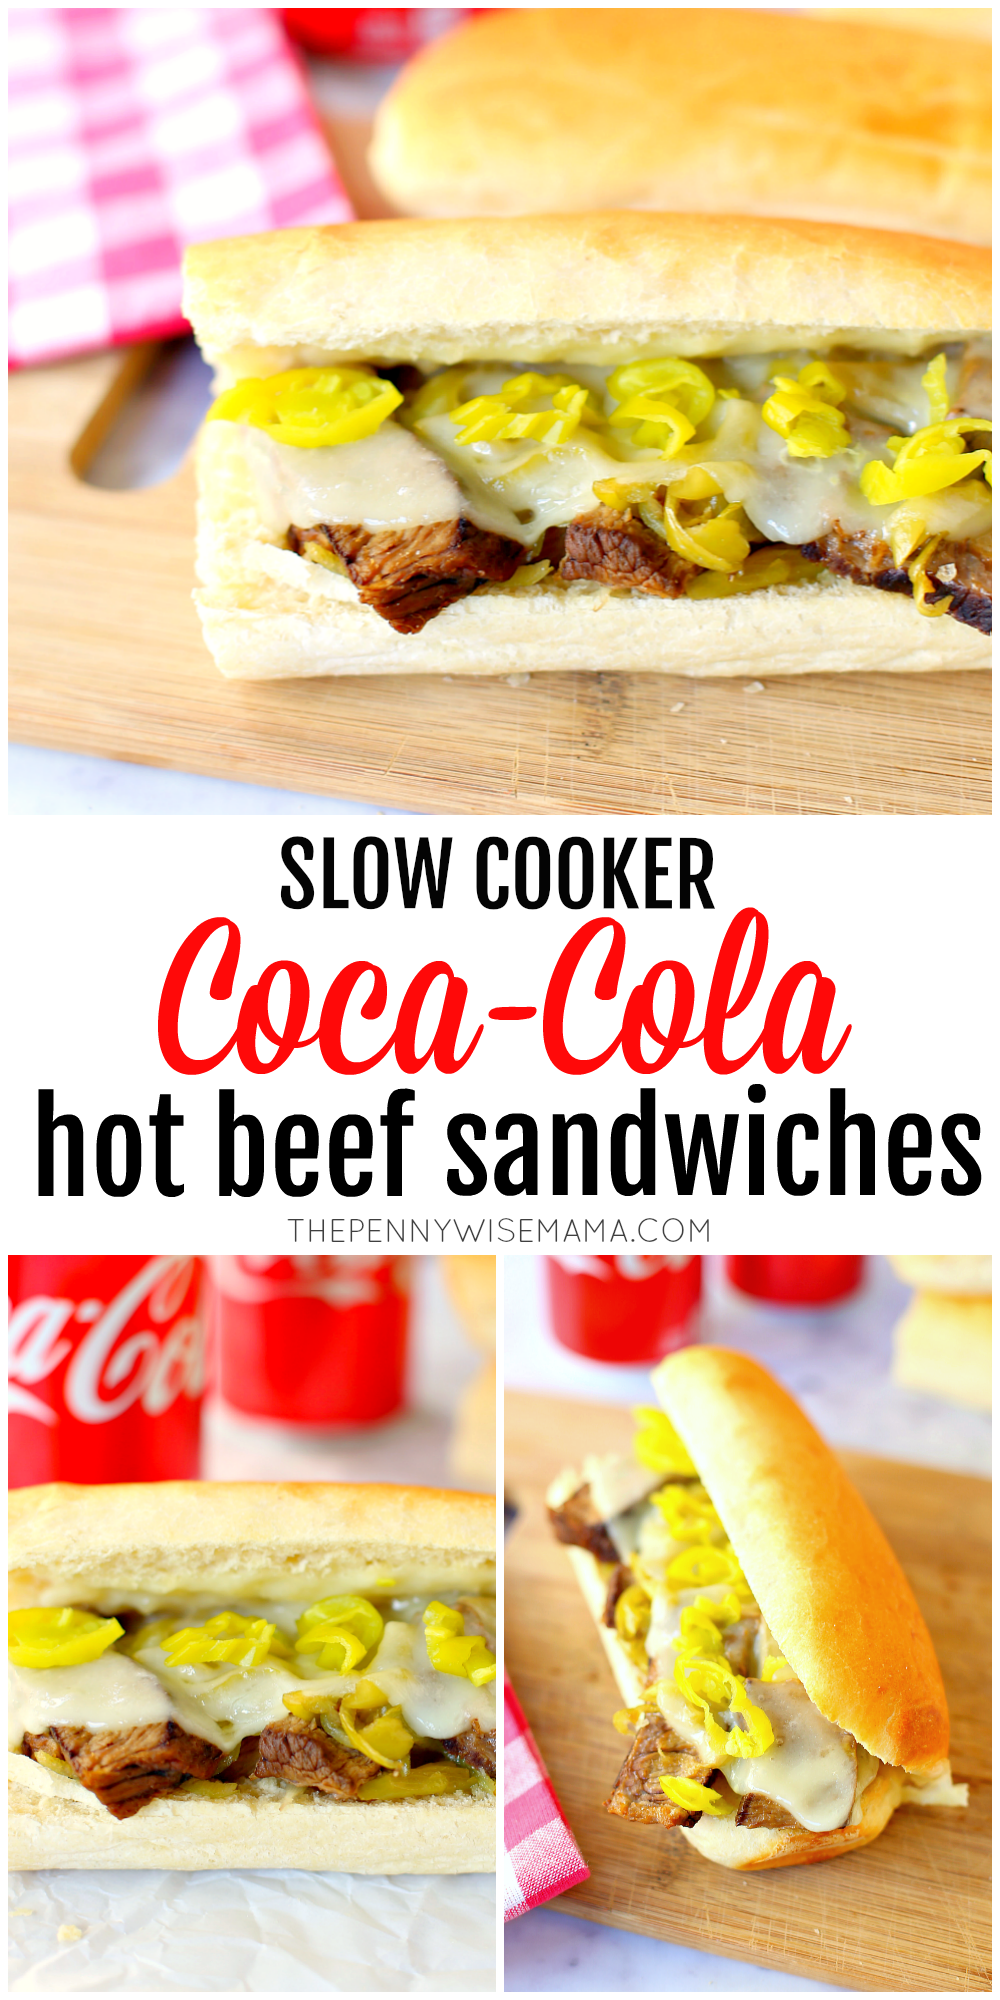 The Best Slow Cooker Coca-Cola Hot Beef Sandwiches